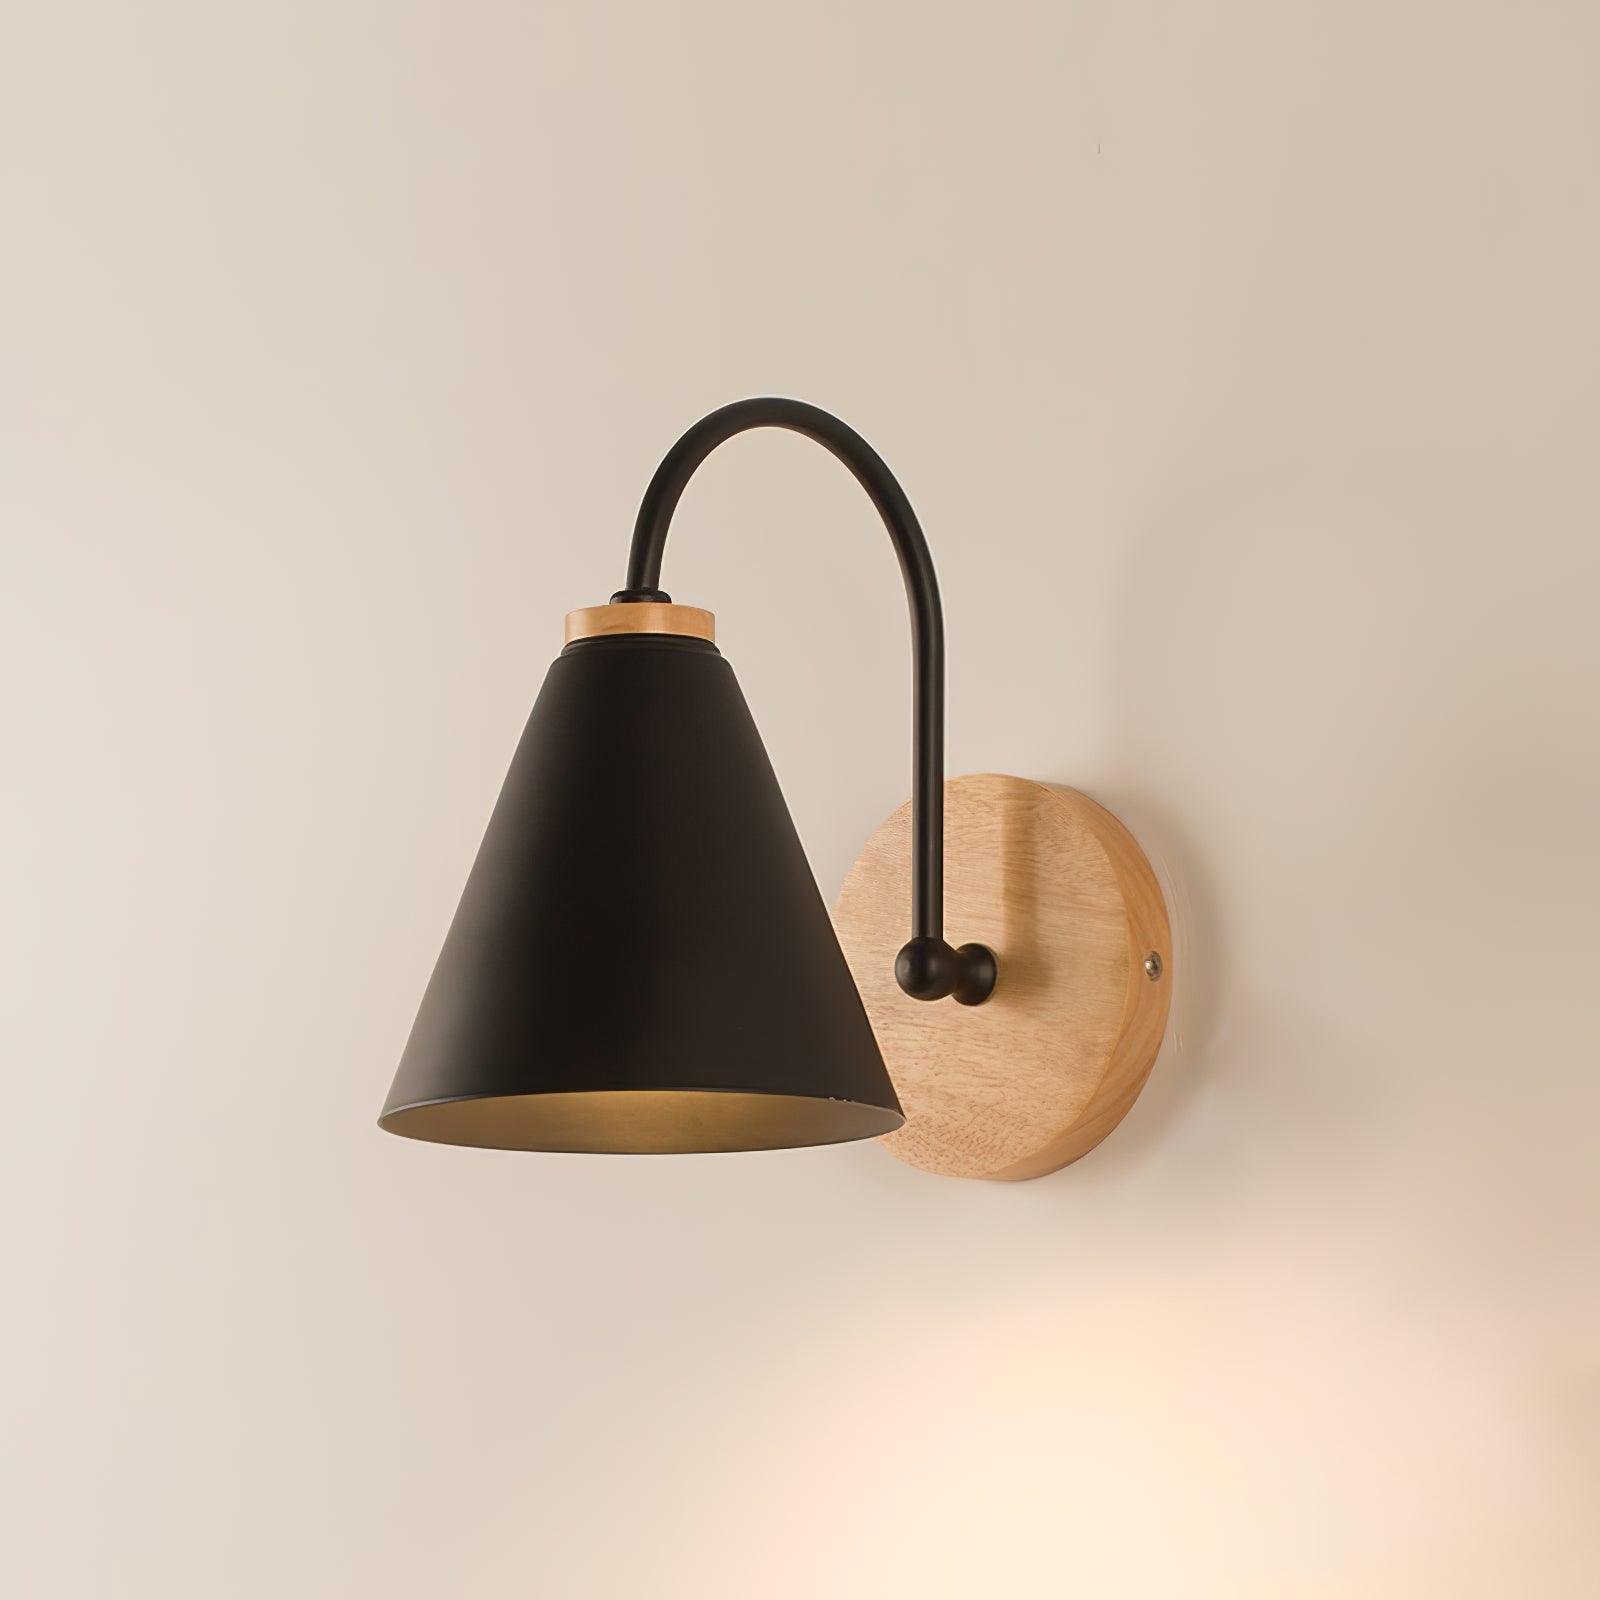 Nordic Wall Lamp in Wooden and Black Kona with a 5.9-inch Diameter and 9.4-inch Height (15cm x 24cm)